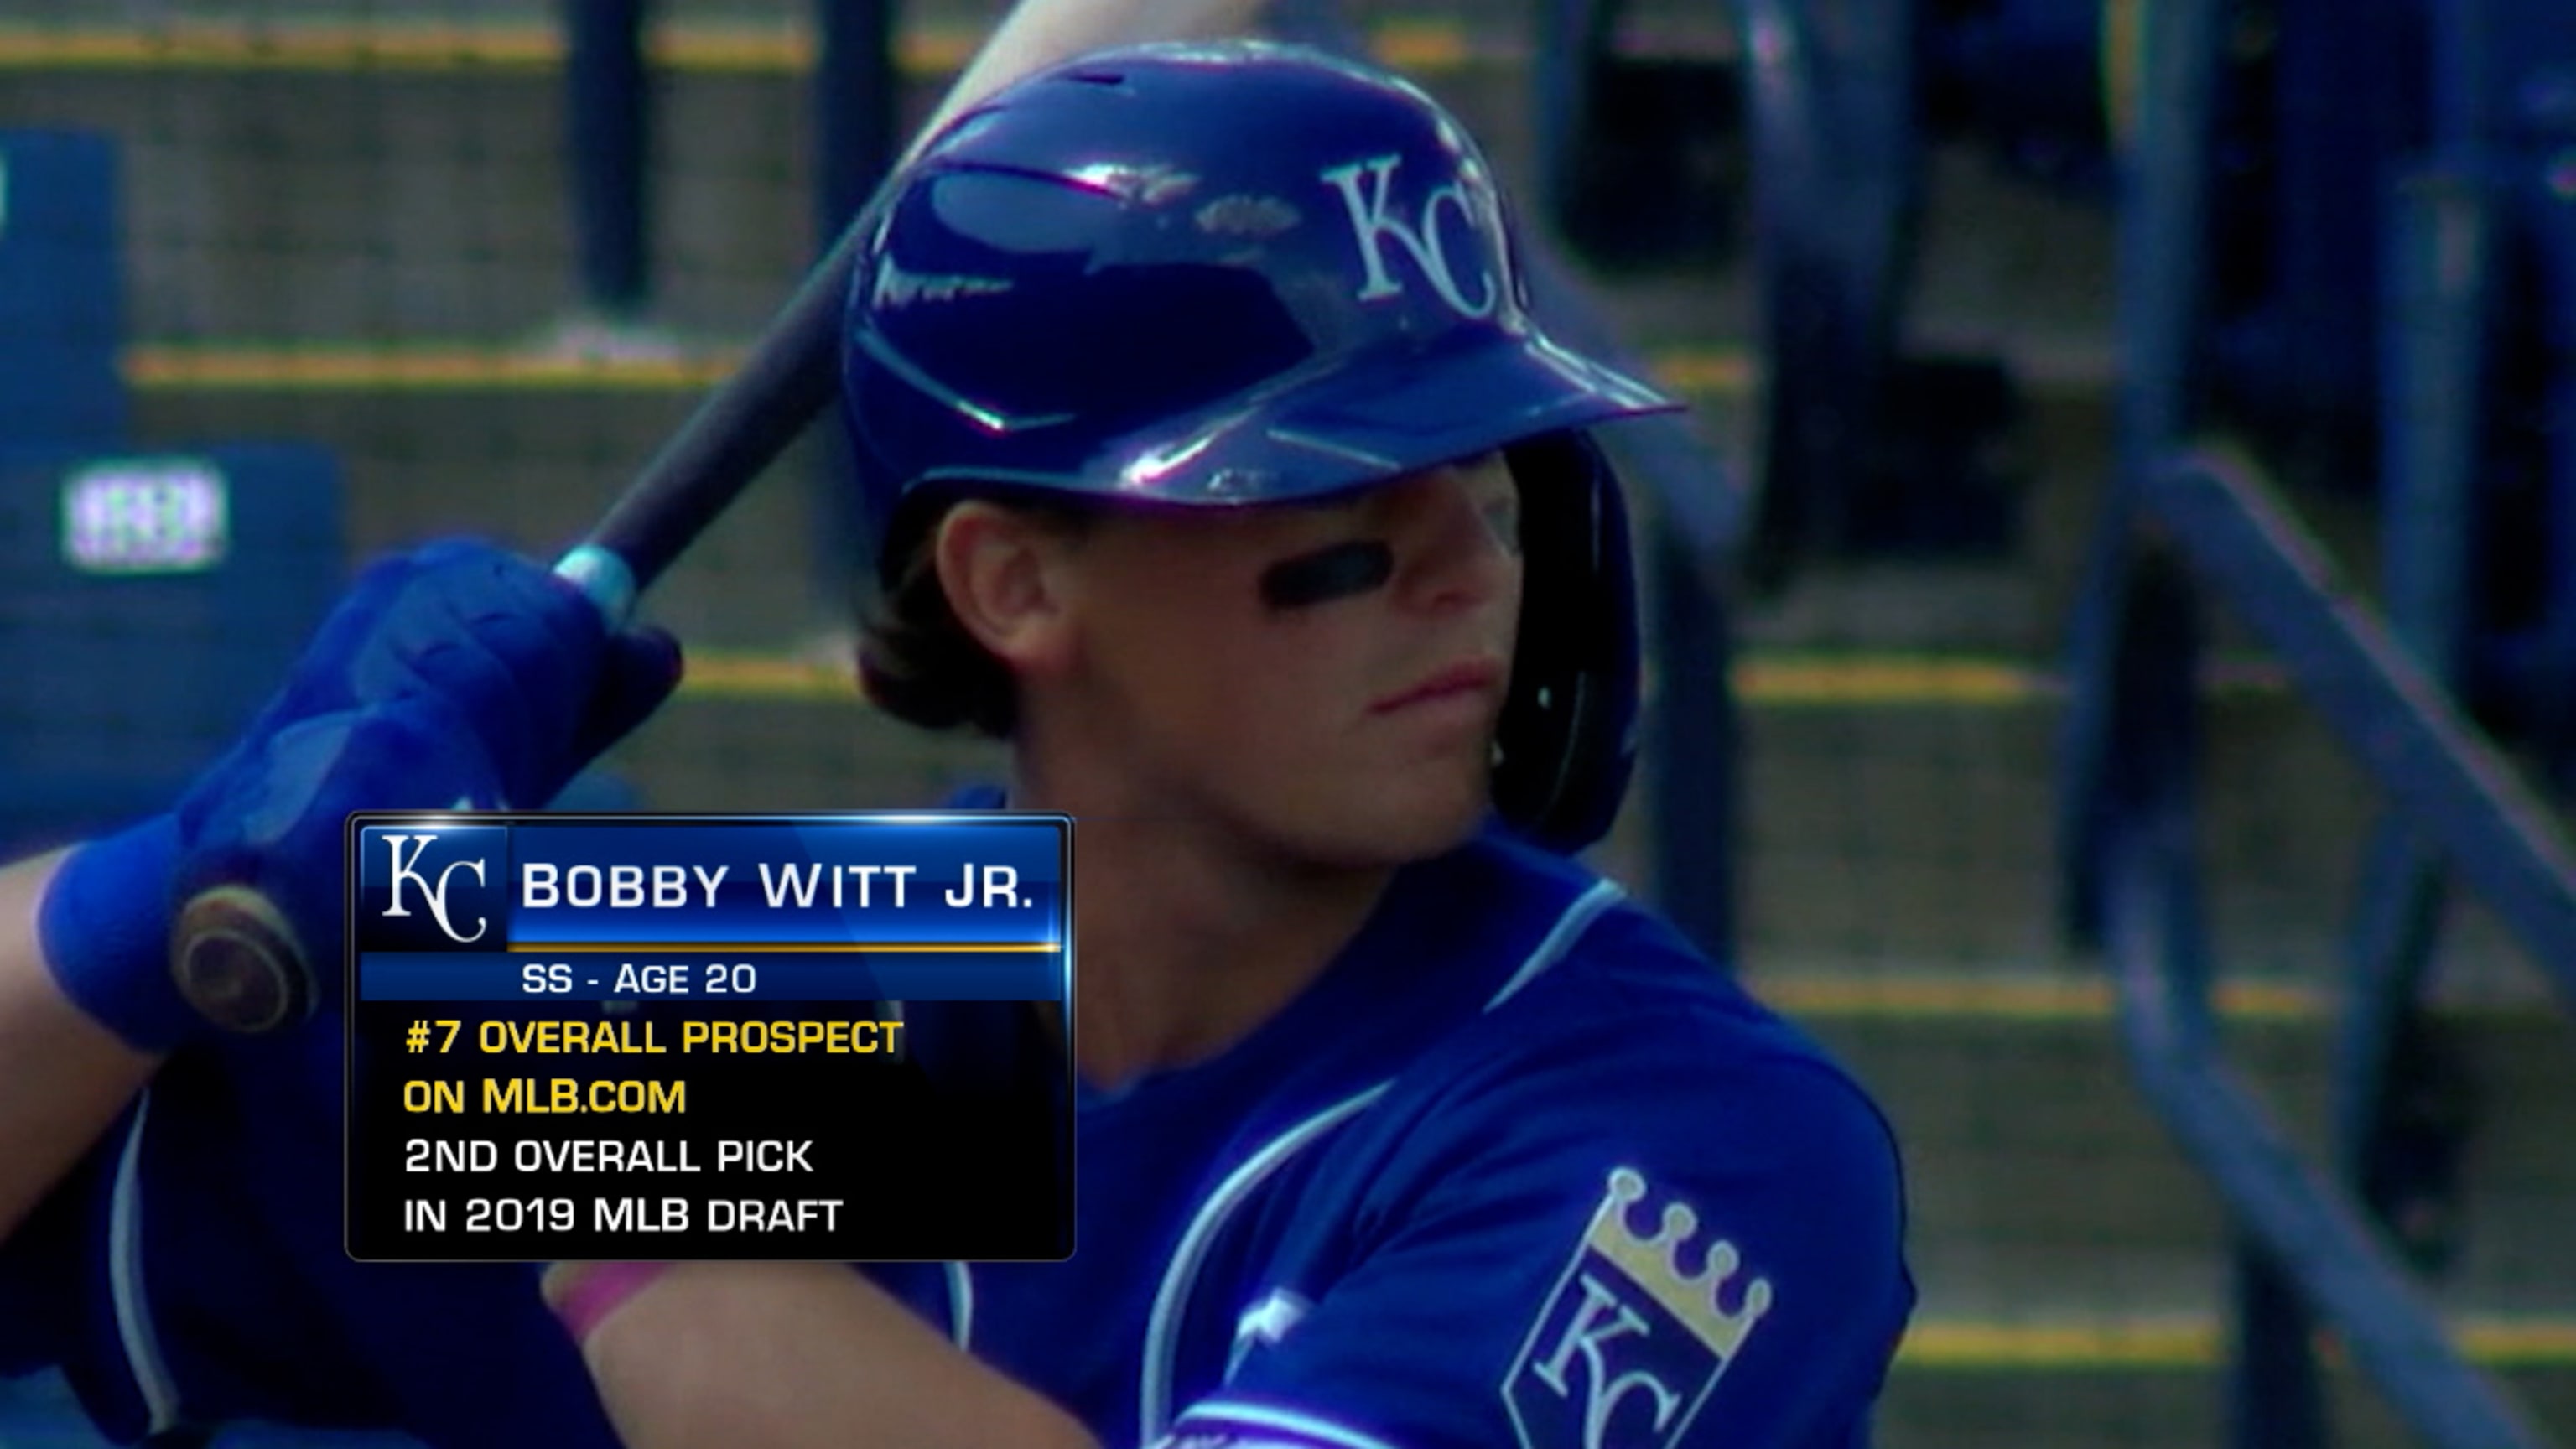 It's official Bobby Witt Jr is on the roster! Win With Witt Jr